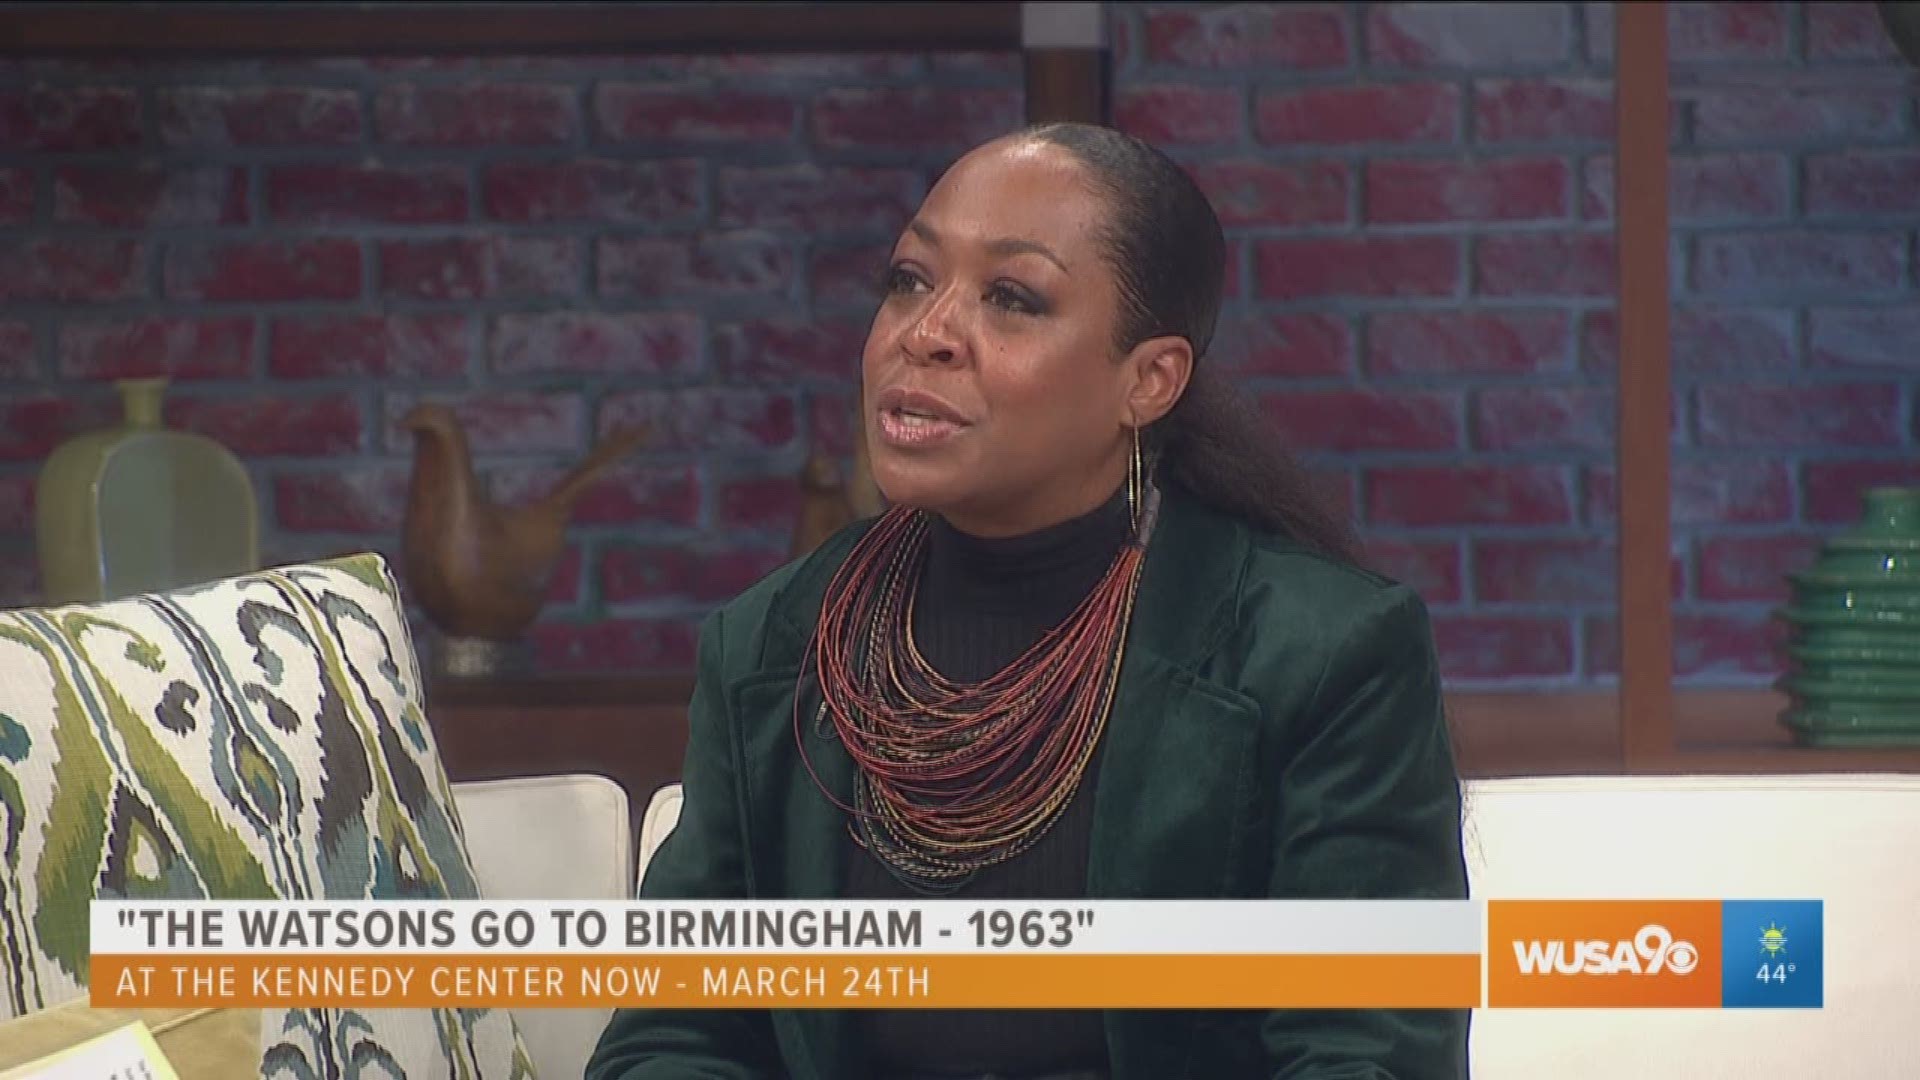 Tichina Arnold, actress, singer and star of the hit show "The Neighborhood" on CBS, chats with the ladies about her role in "The Watsons Go to Birmingham-1963" which is currently showing at The Kennedy Center till March 24.